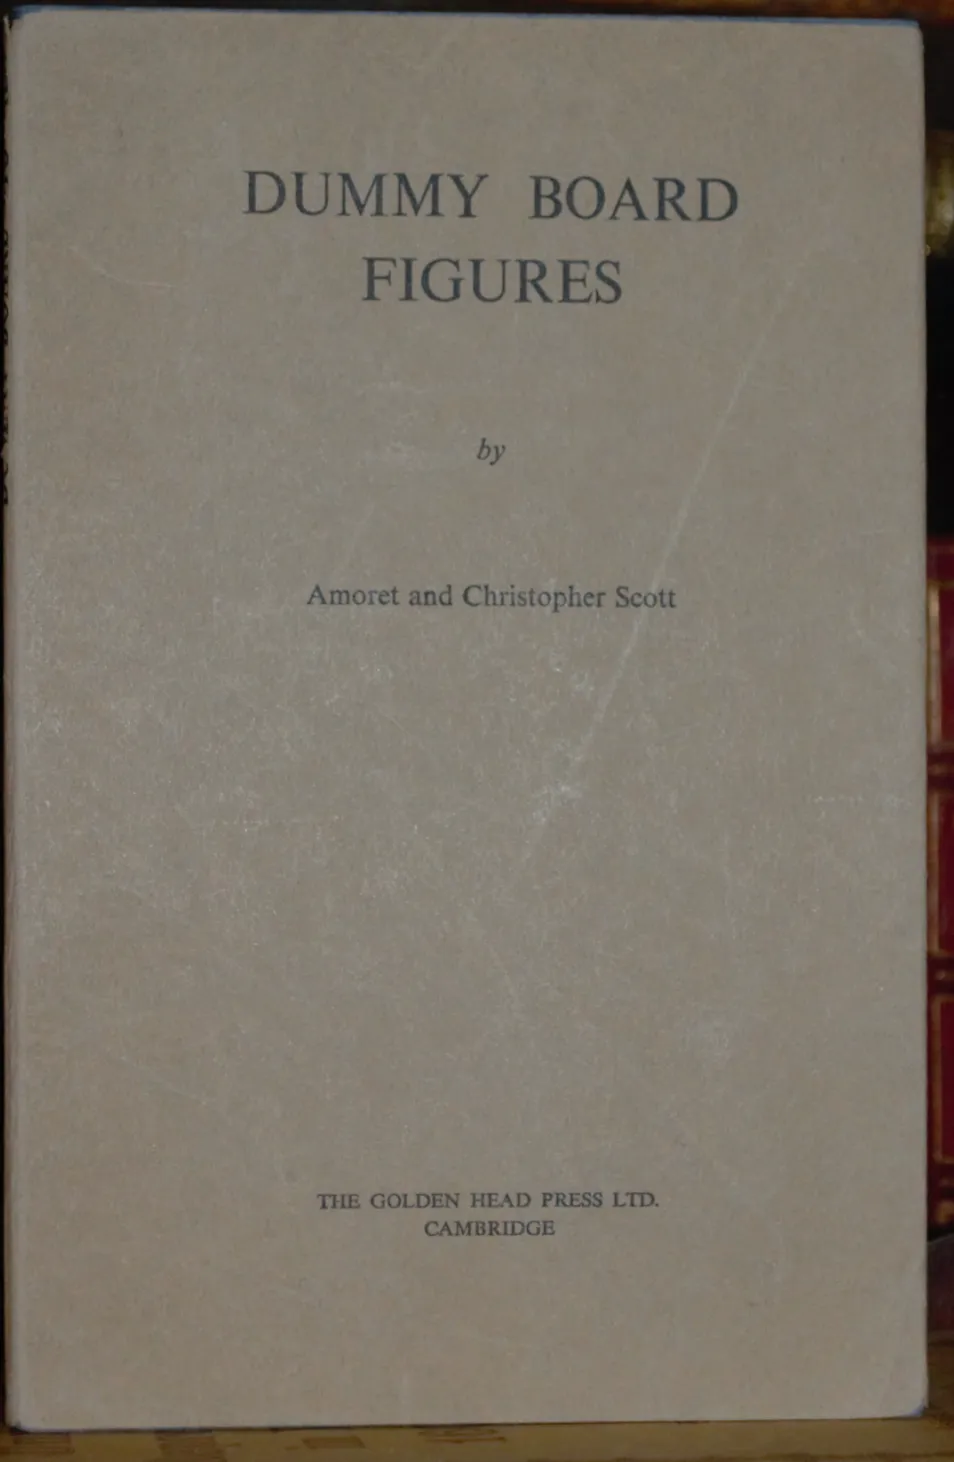 Dummy Board Figures by Amoret and Christopher Scott (The Golden Head Press, 1966) £30.83, Abe Books